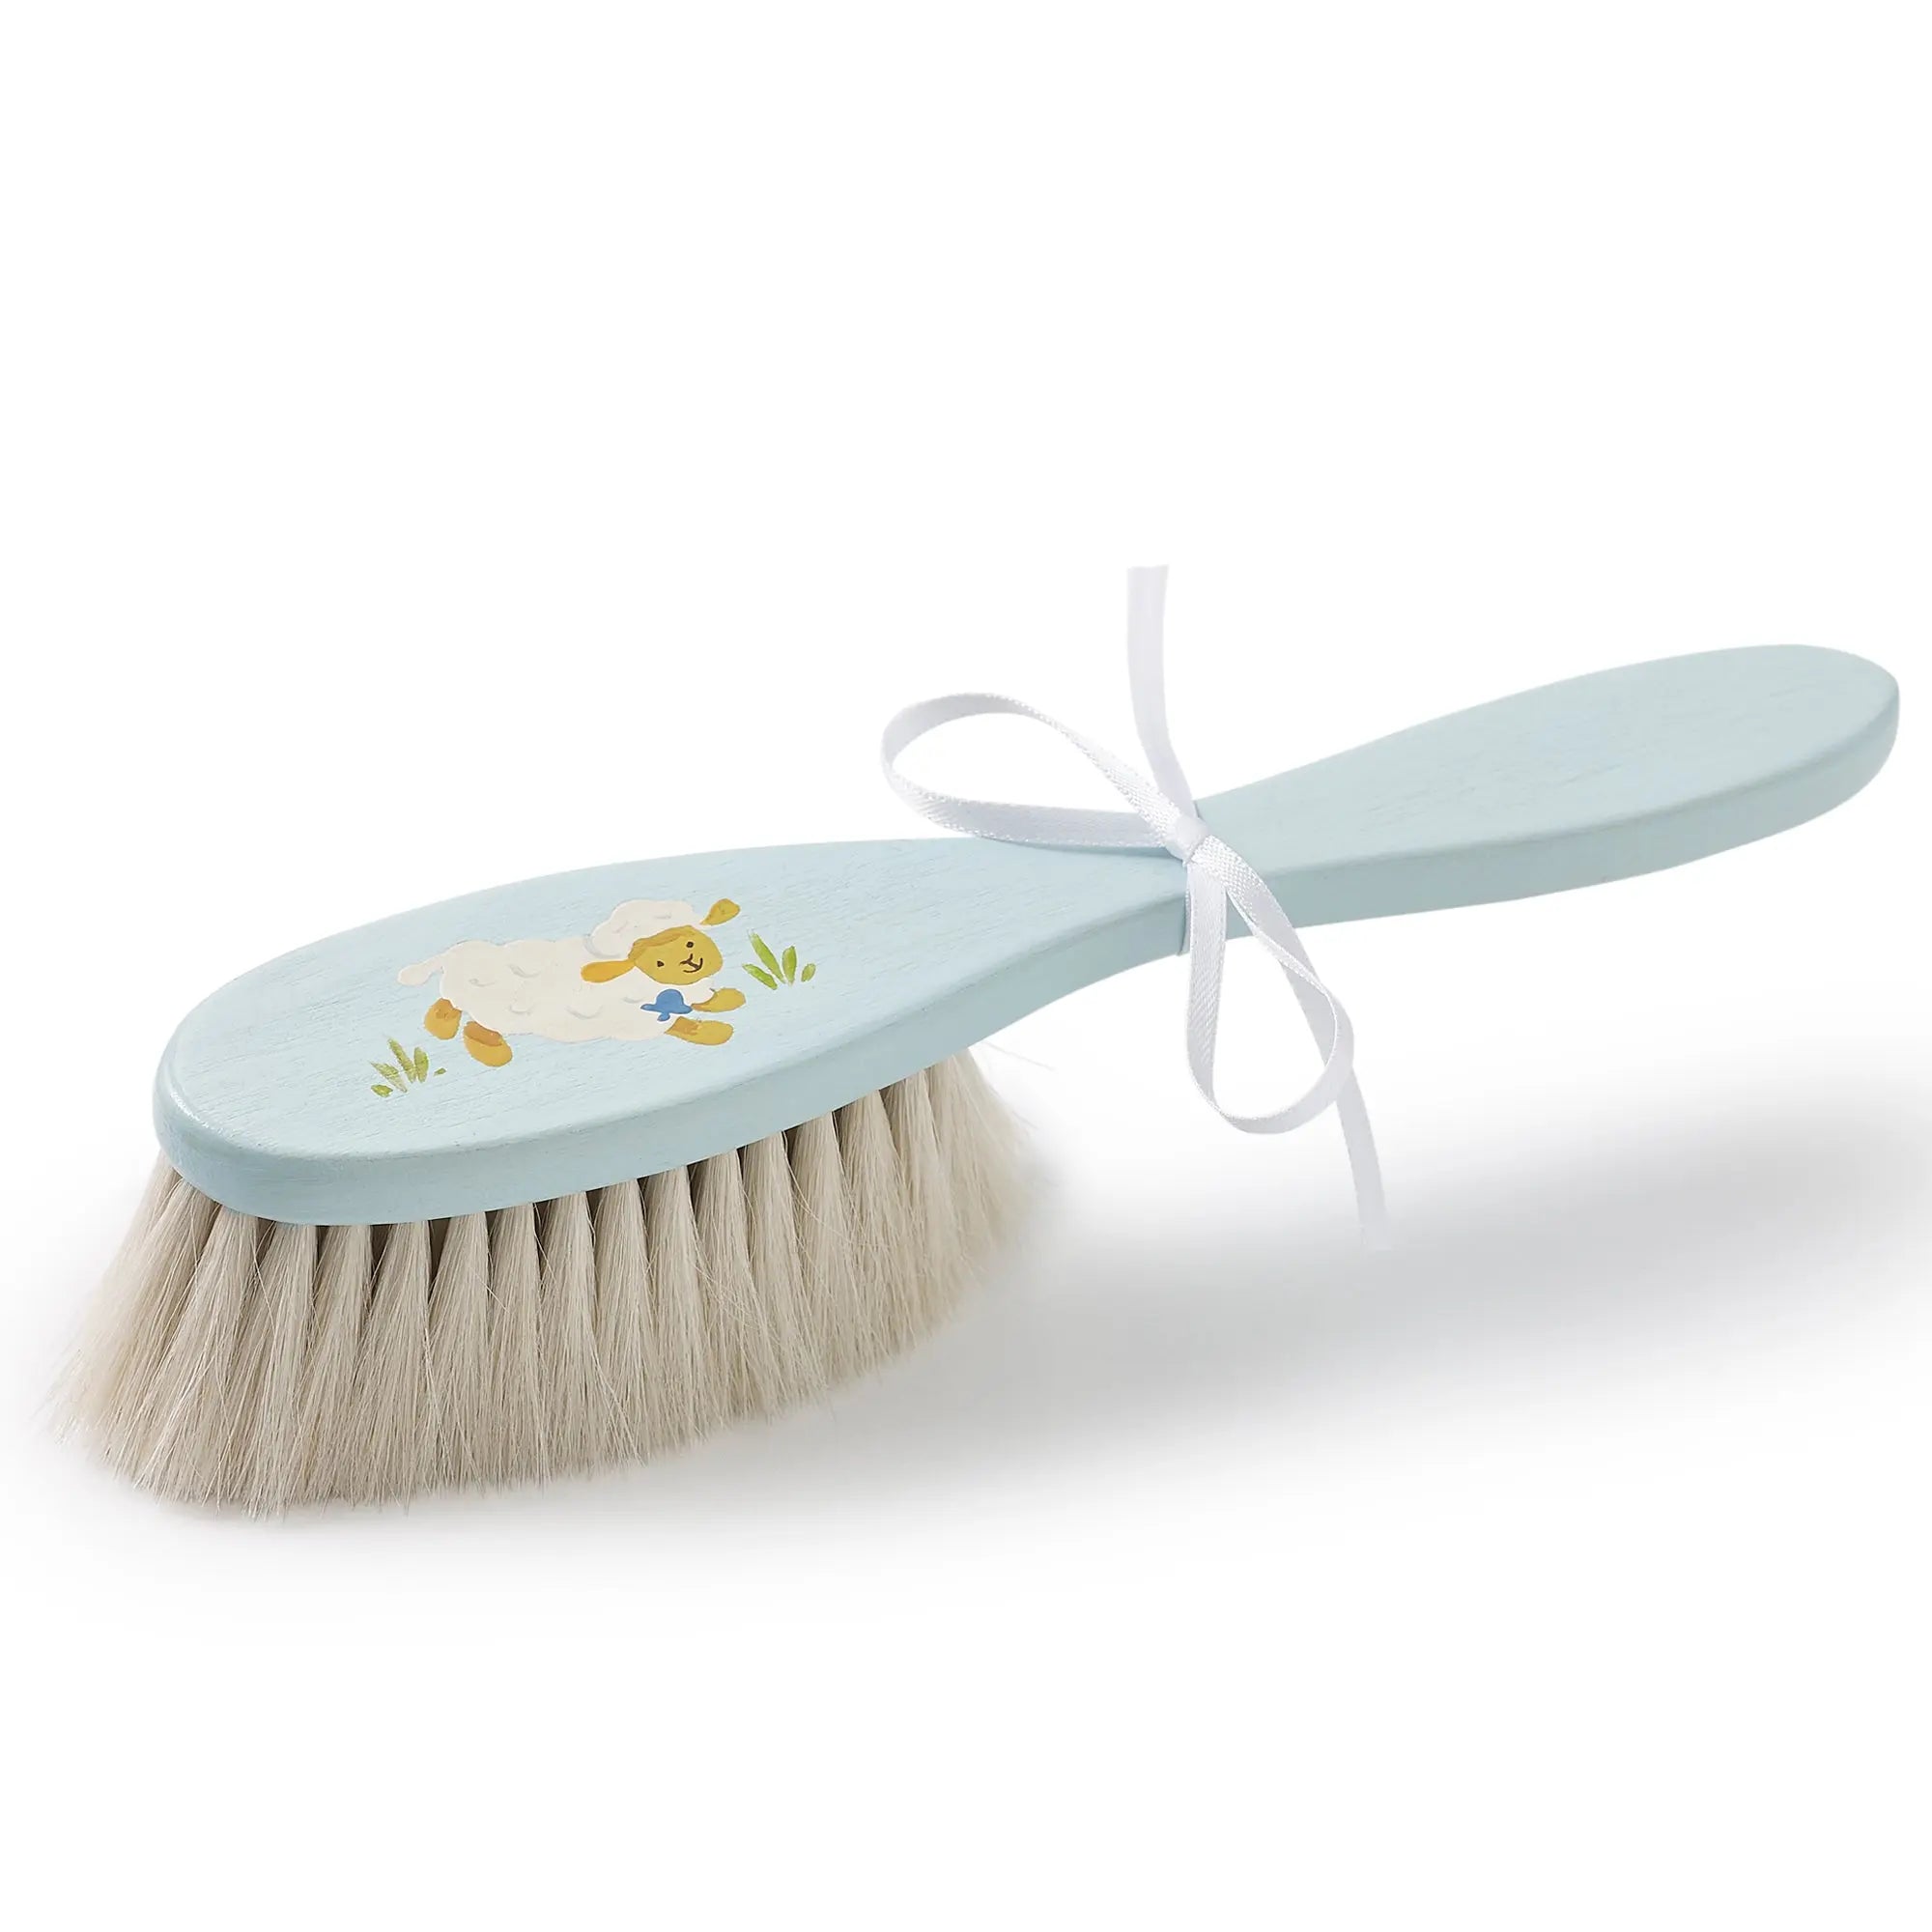 Hairbrush hand-painted sheep blue-Toiletries & baby brushes-Blue Almonds-Blue Almonds-London-South Kensington